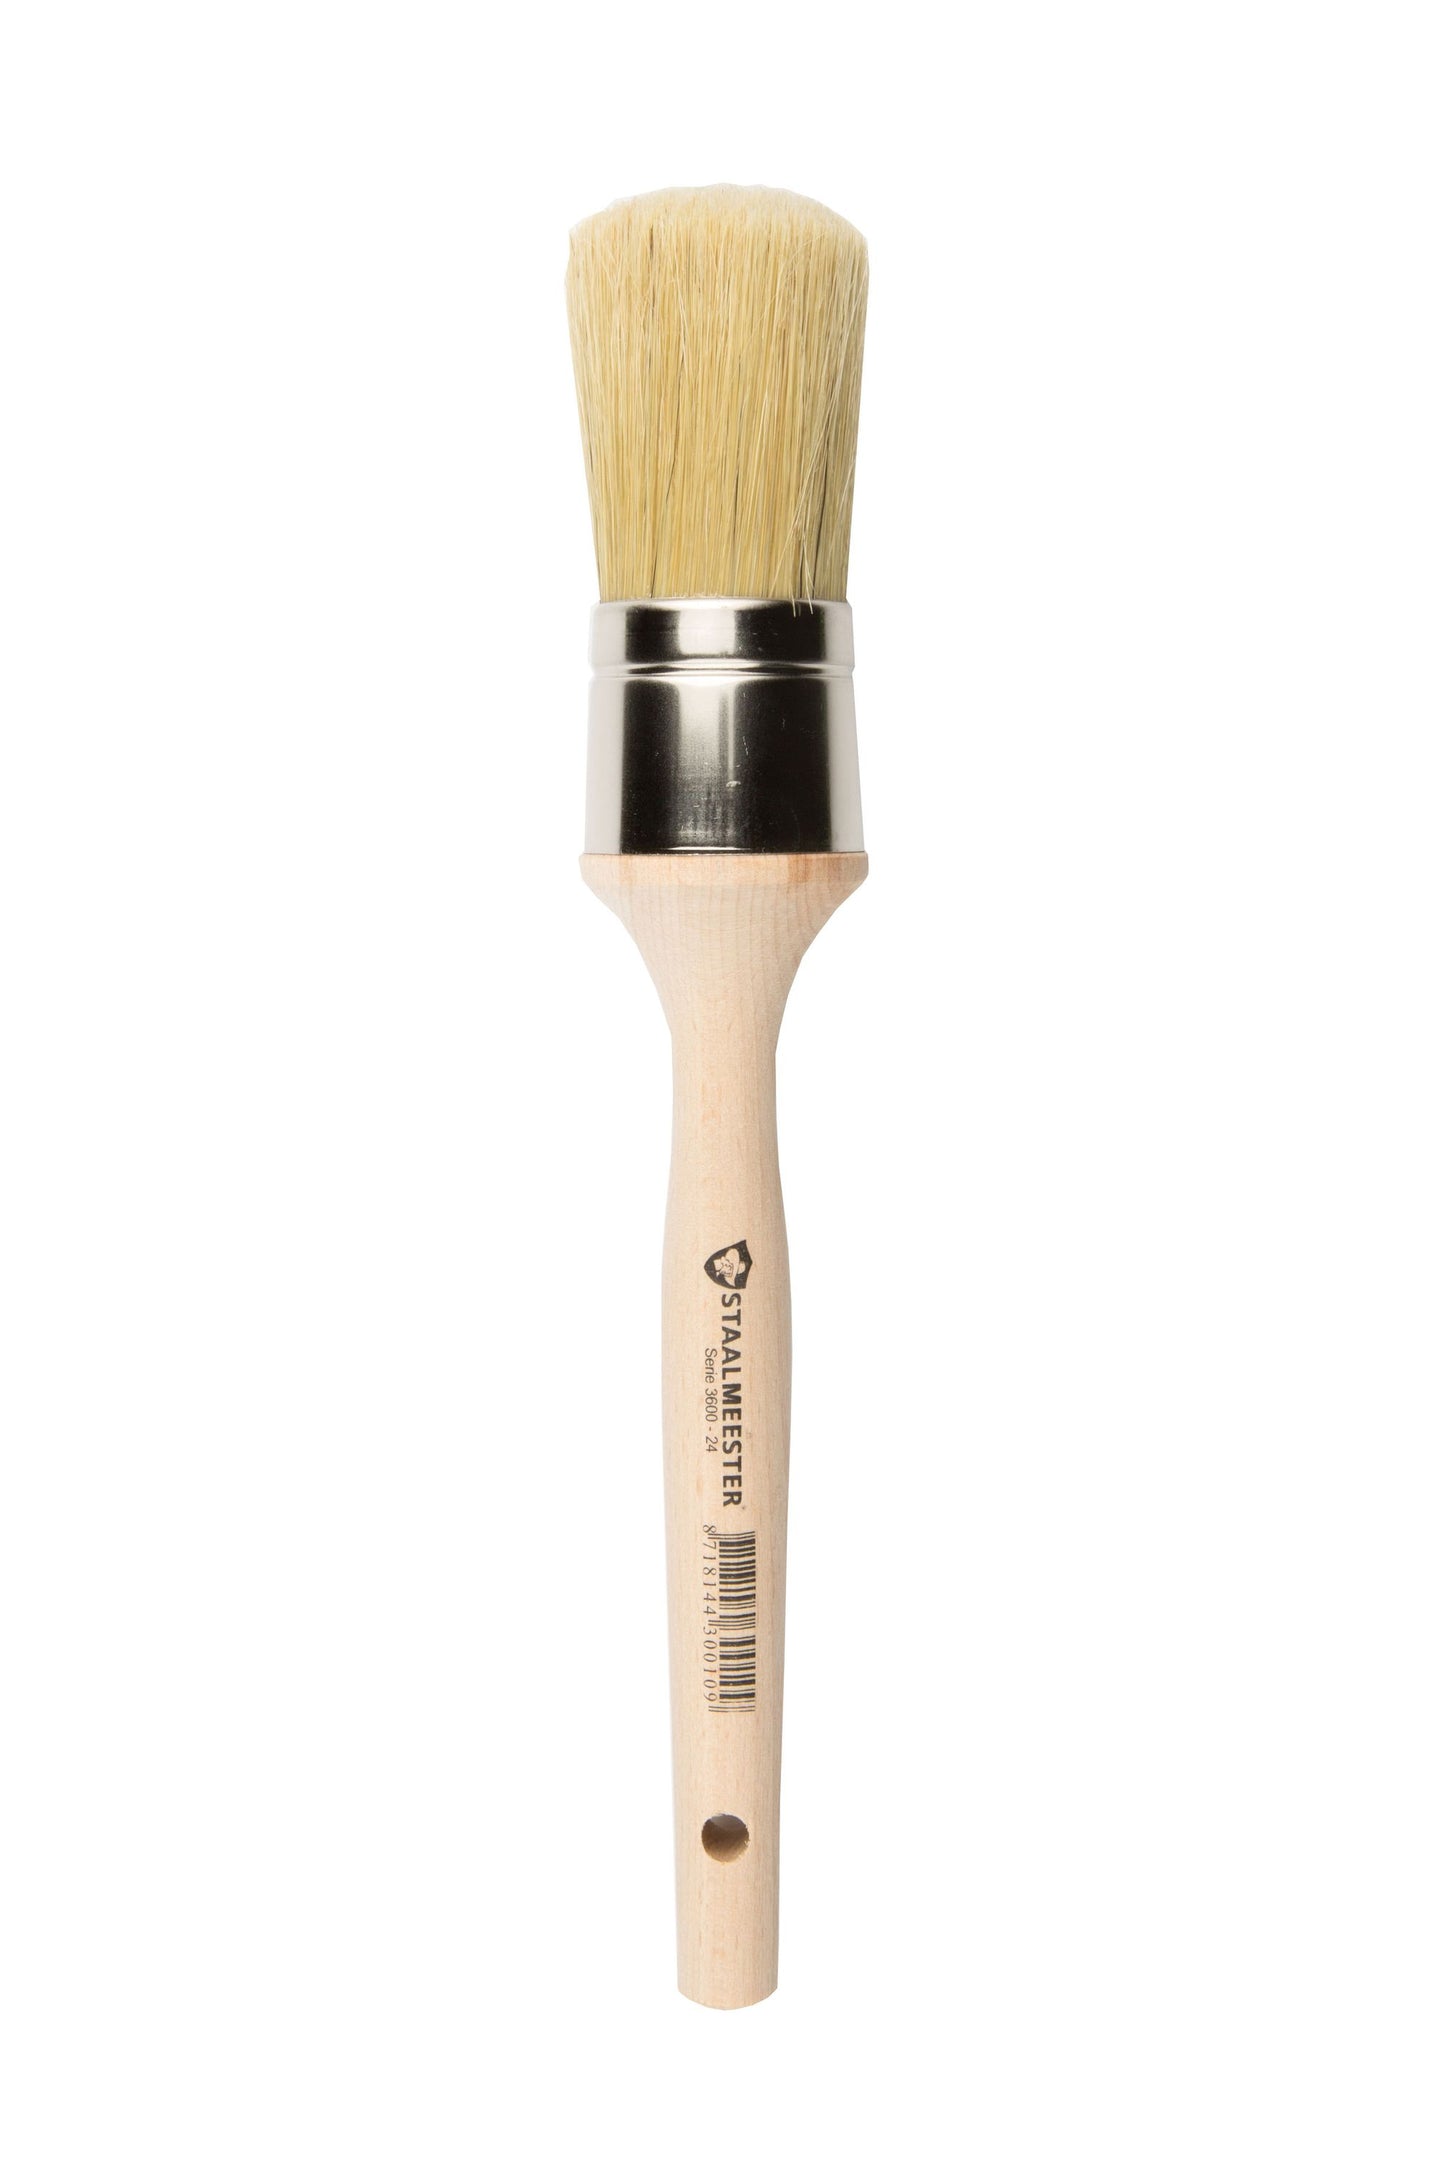 Natural Series Wax Brush Round #24 (1.75in) by Staalmeester